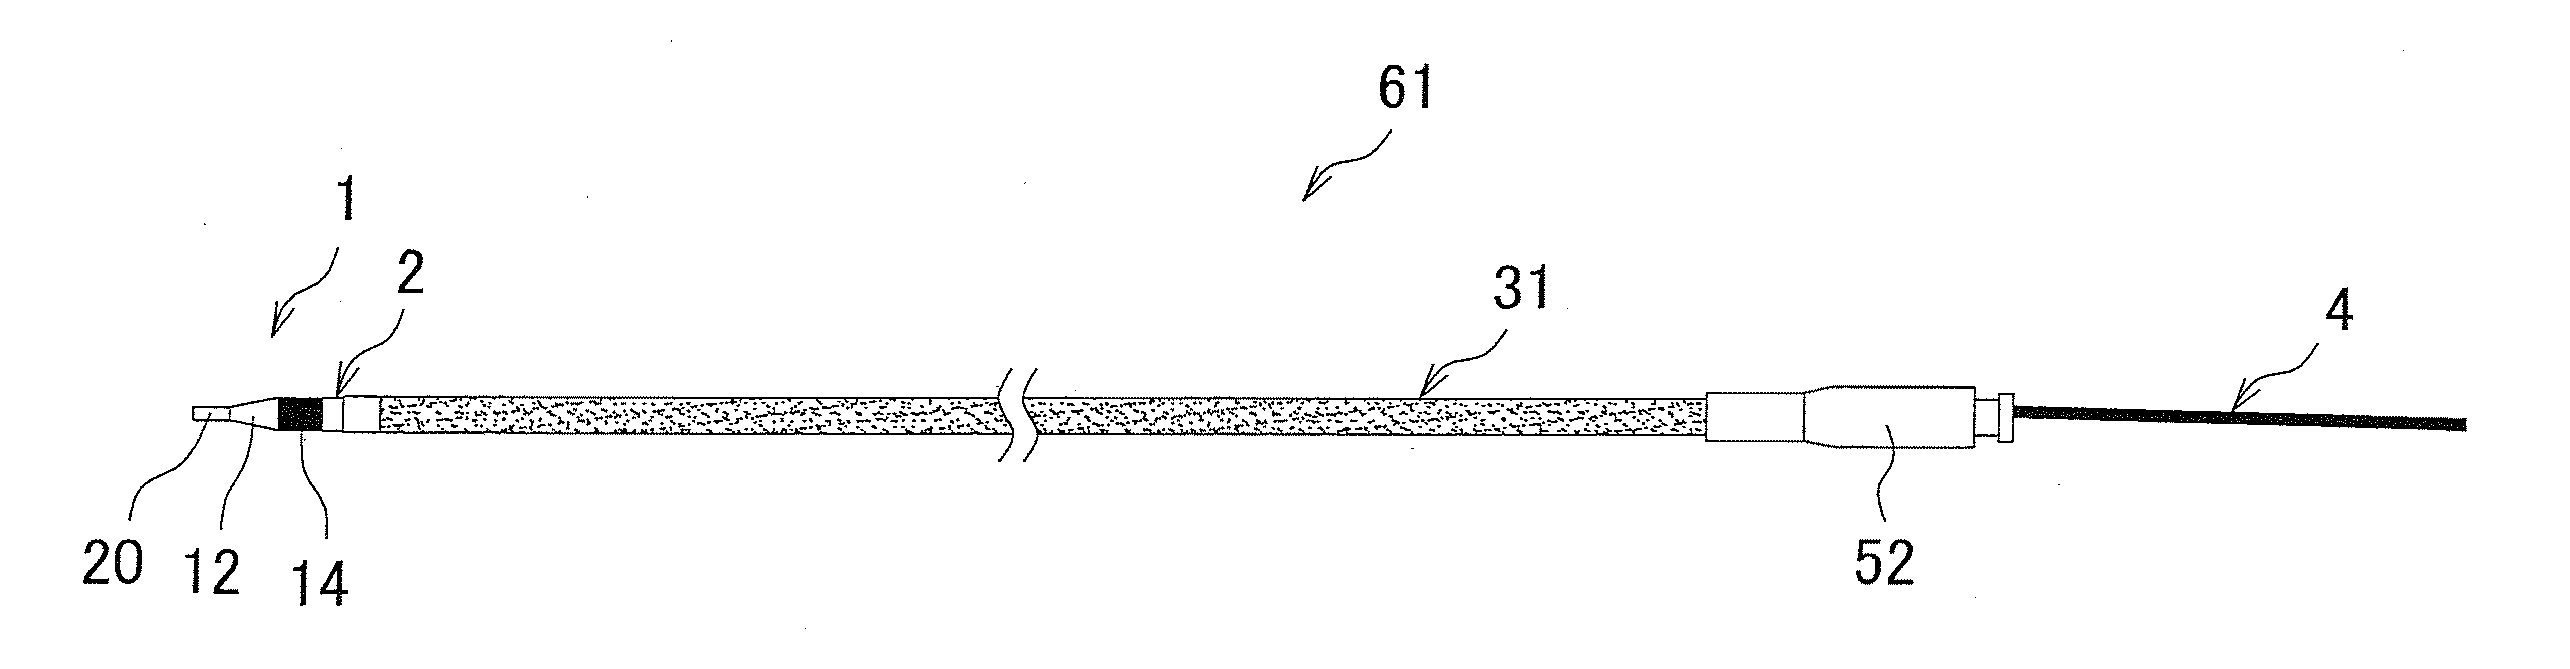 Insertion assisting tool for catheter, catheter assembly, and catheter set